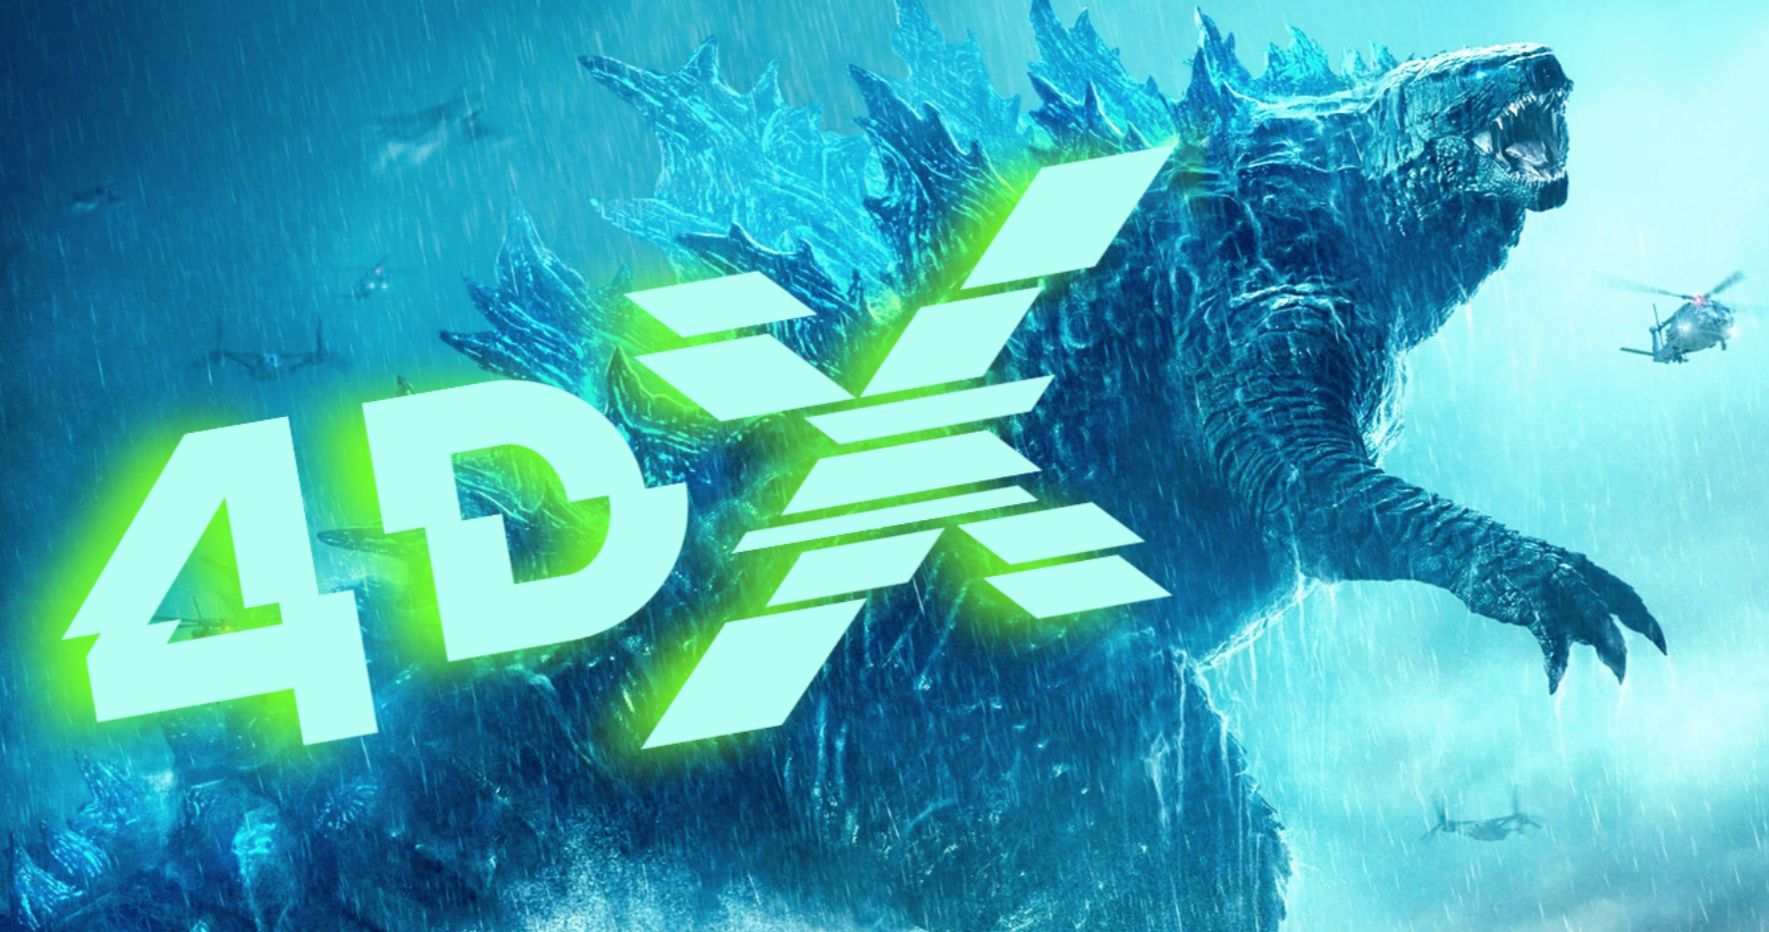 Godzilla vs Kong Movie Review: Monstertainment At Its Best! [The Best 4DX  Experience Ever]